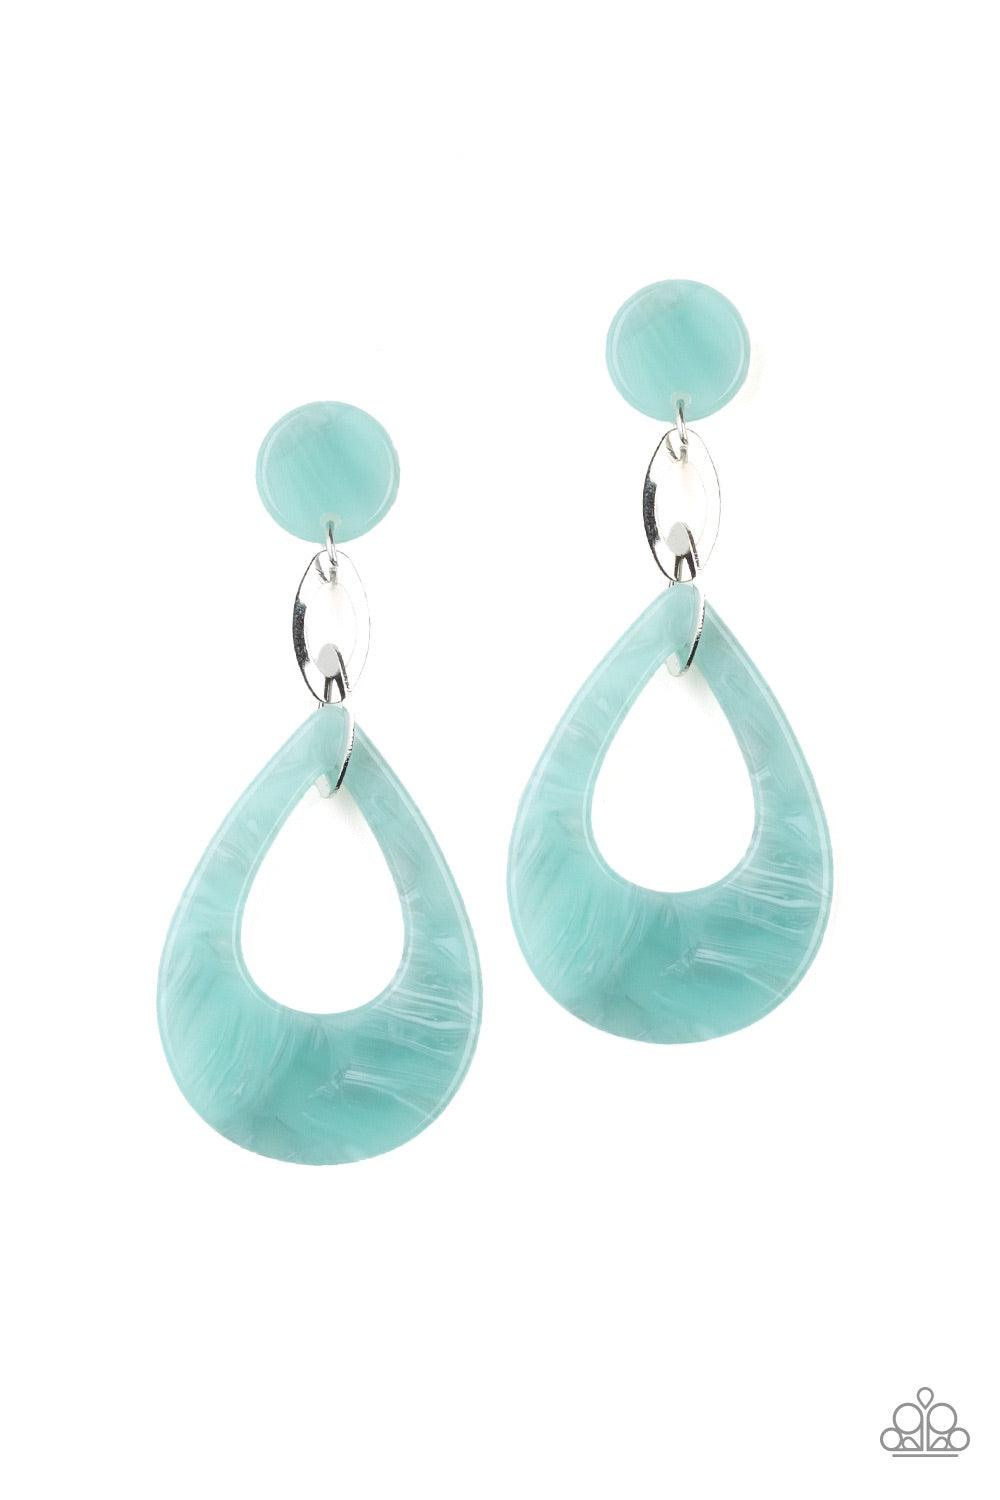 Paparazzi Accessories Beach Oasis - Blue Brushed in a faux marble finish, a blue acrylic teardrop links to a matching acrylic fitting as it swings from the ear for a summery look. Earring attaches to a standard post fitting. Jewelry